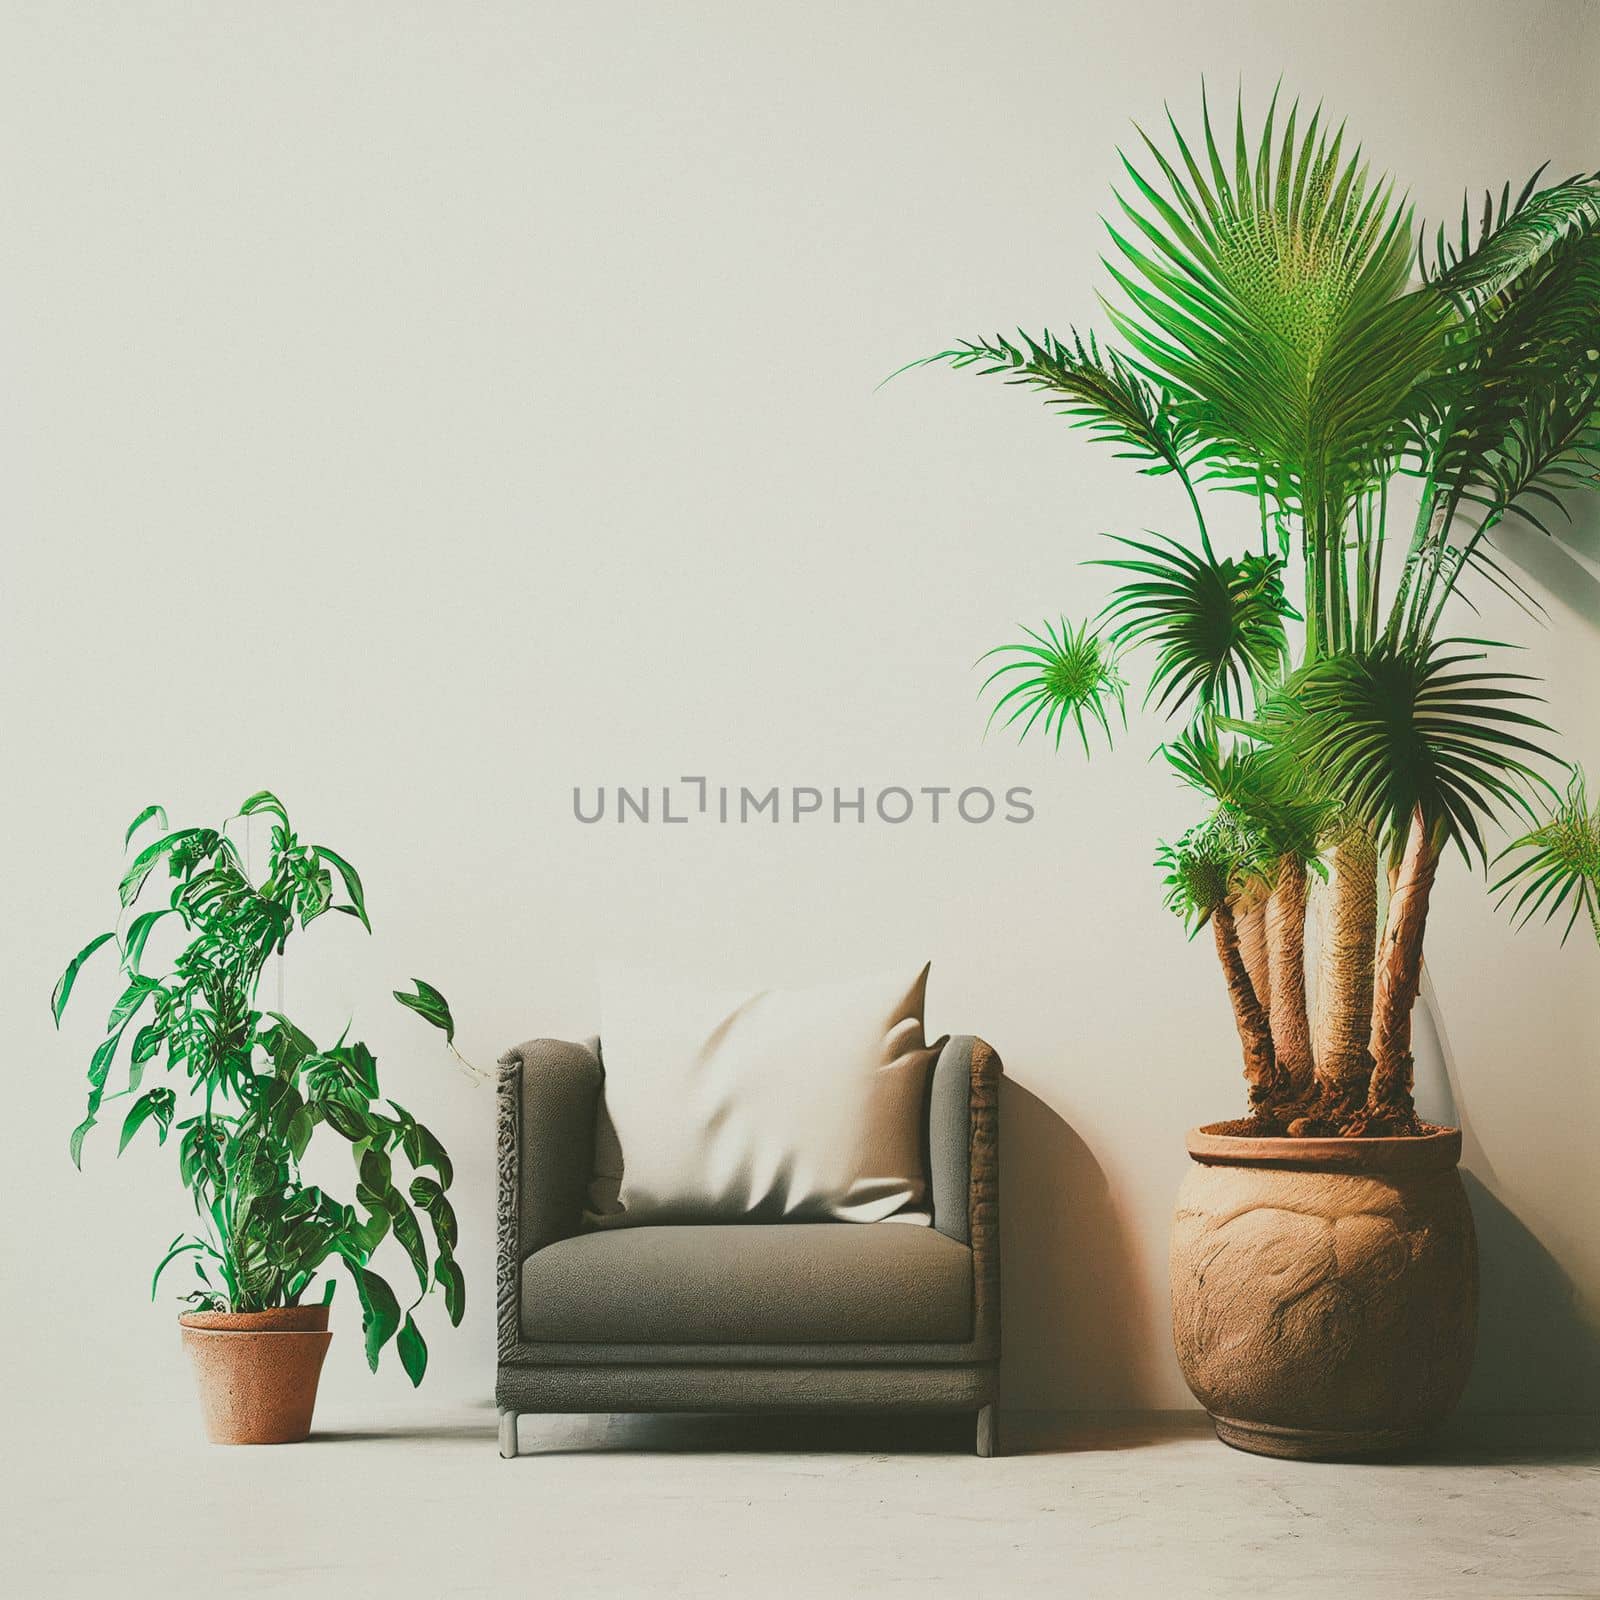 Mockup of empty frame displayed inside room interior with white wall background and plant pot nearby by FokasuArt